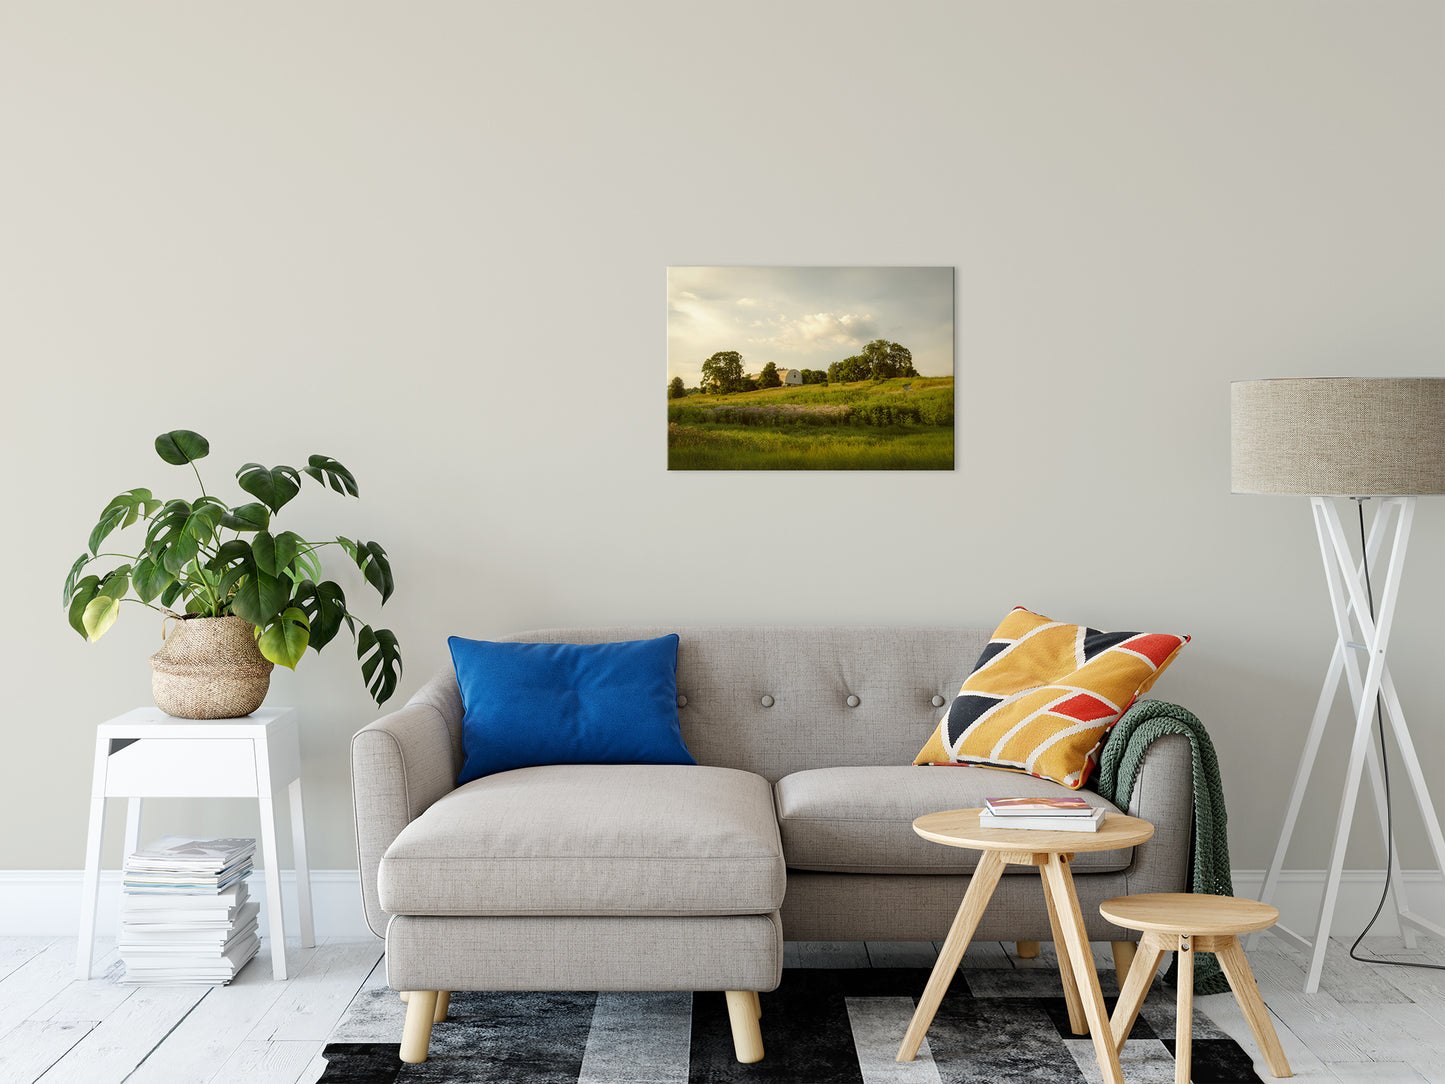 Remnant of Better Days Landscape Photo Fine Art Canvas Wall Art Prints 20" x 30" - PIPAFINEART